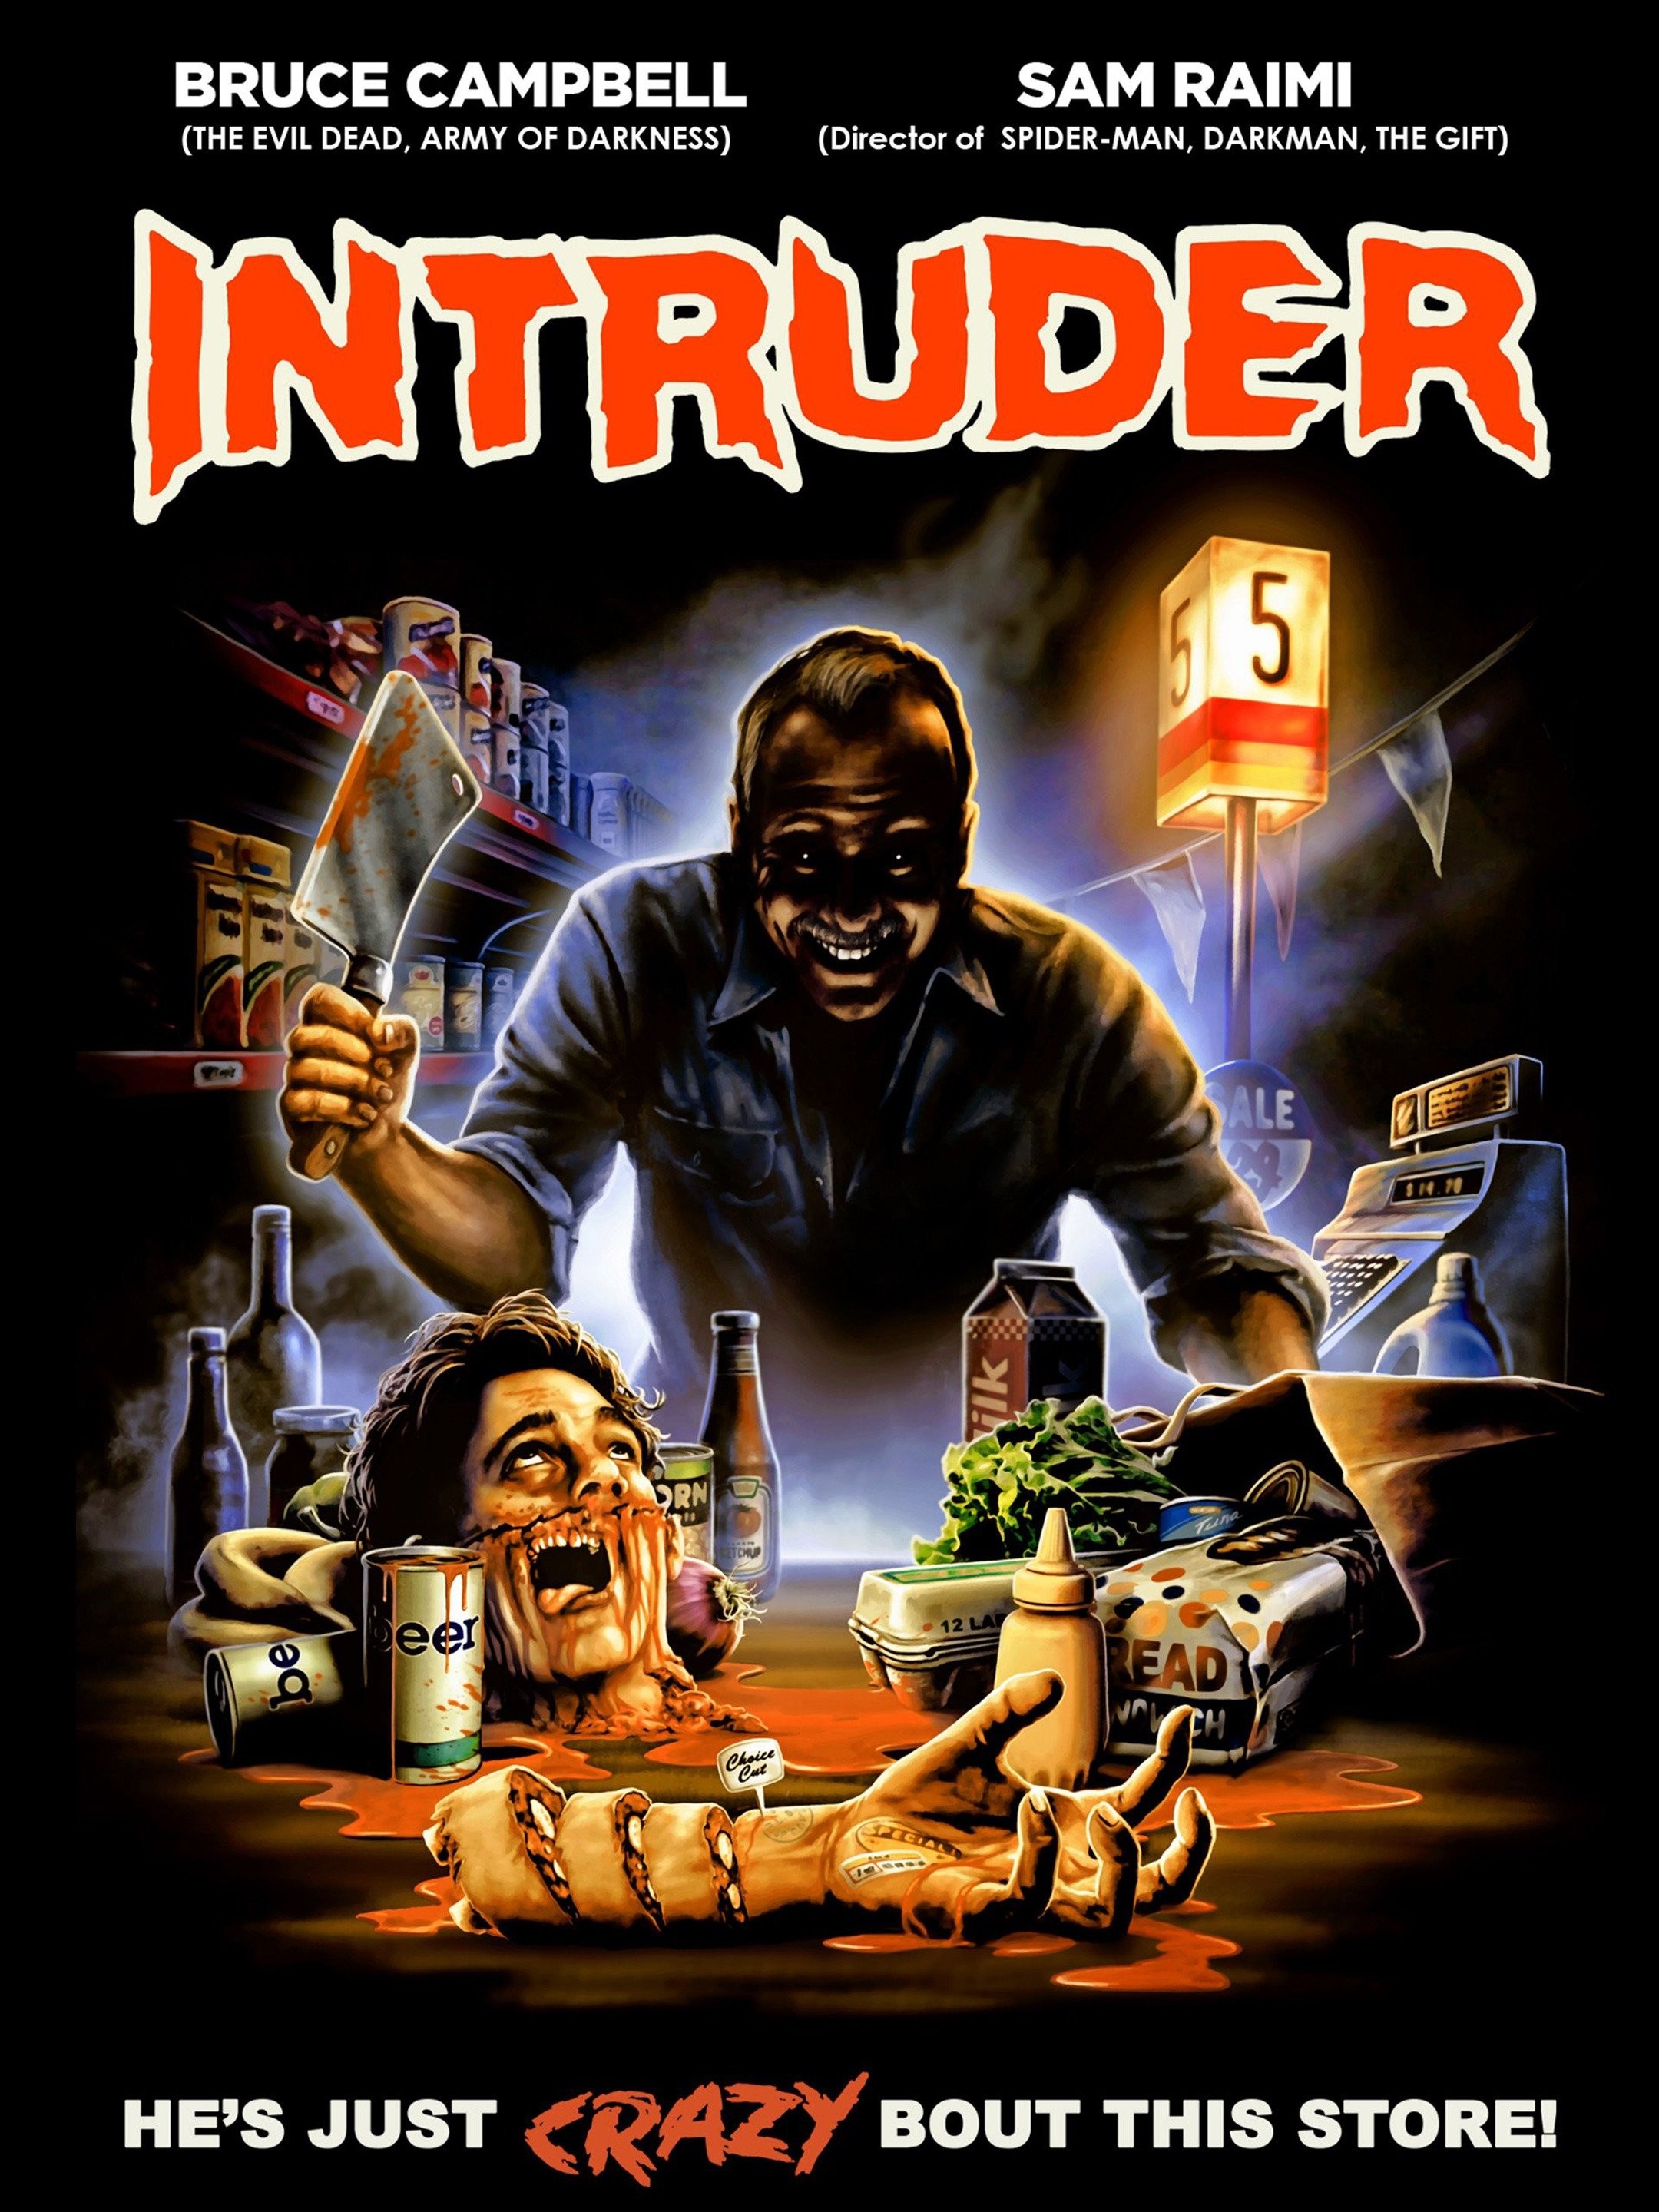 New Steam release Intruder is horrifying because it makes you feel